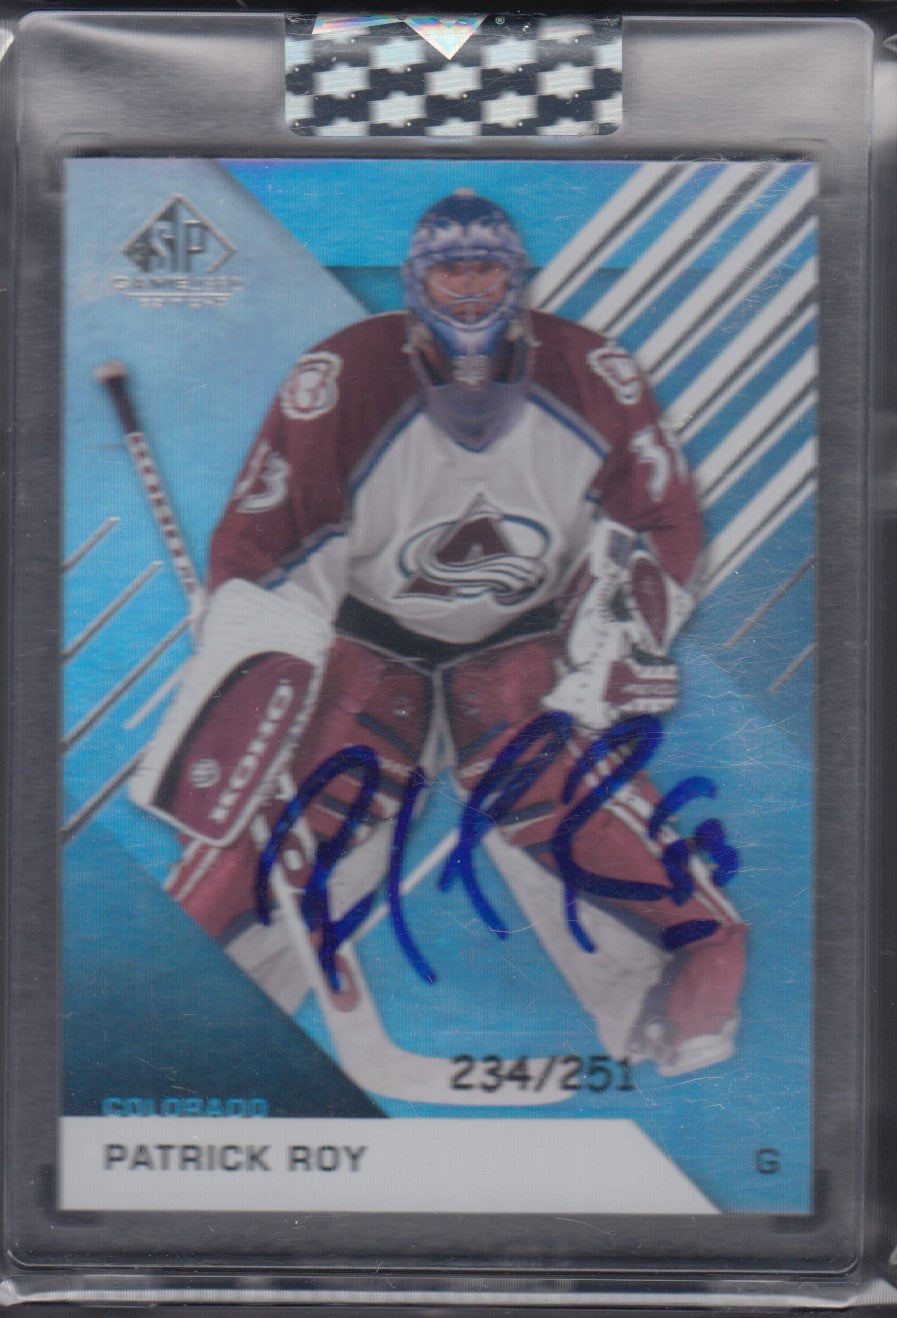 PATRICK ROY, 2019 SP Game Used Auto Buyback, /251